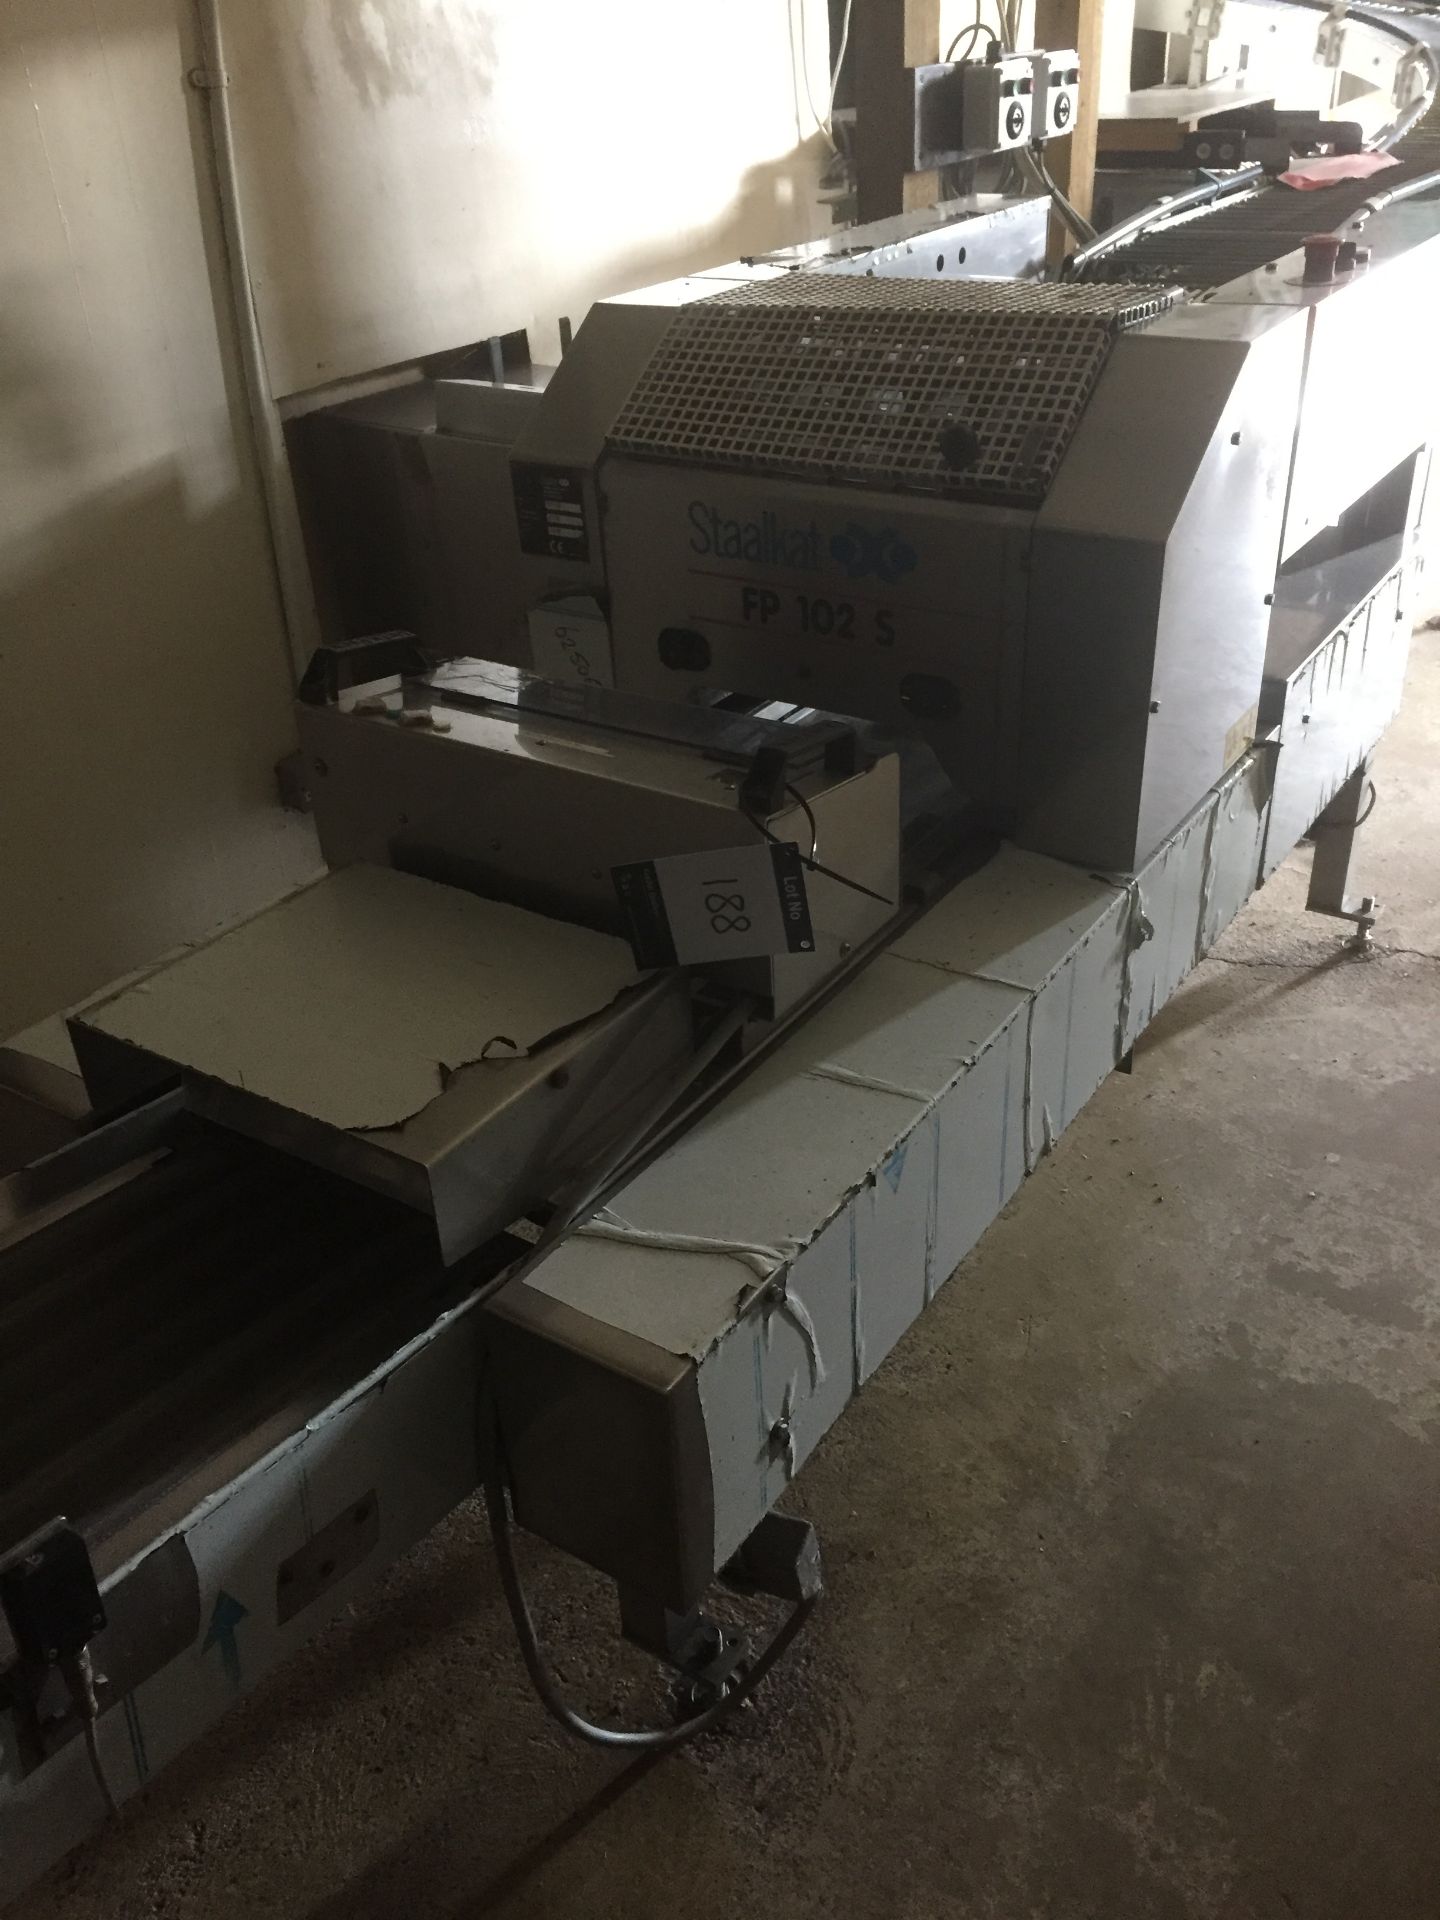 Staalkat FP 102S 5 lane egg packing machine, Serial No. 2125 (2005) with Hedipack in-line printer